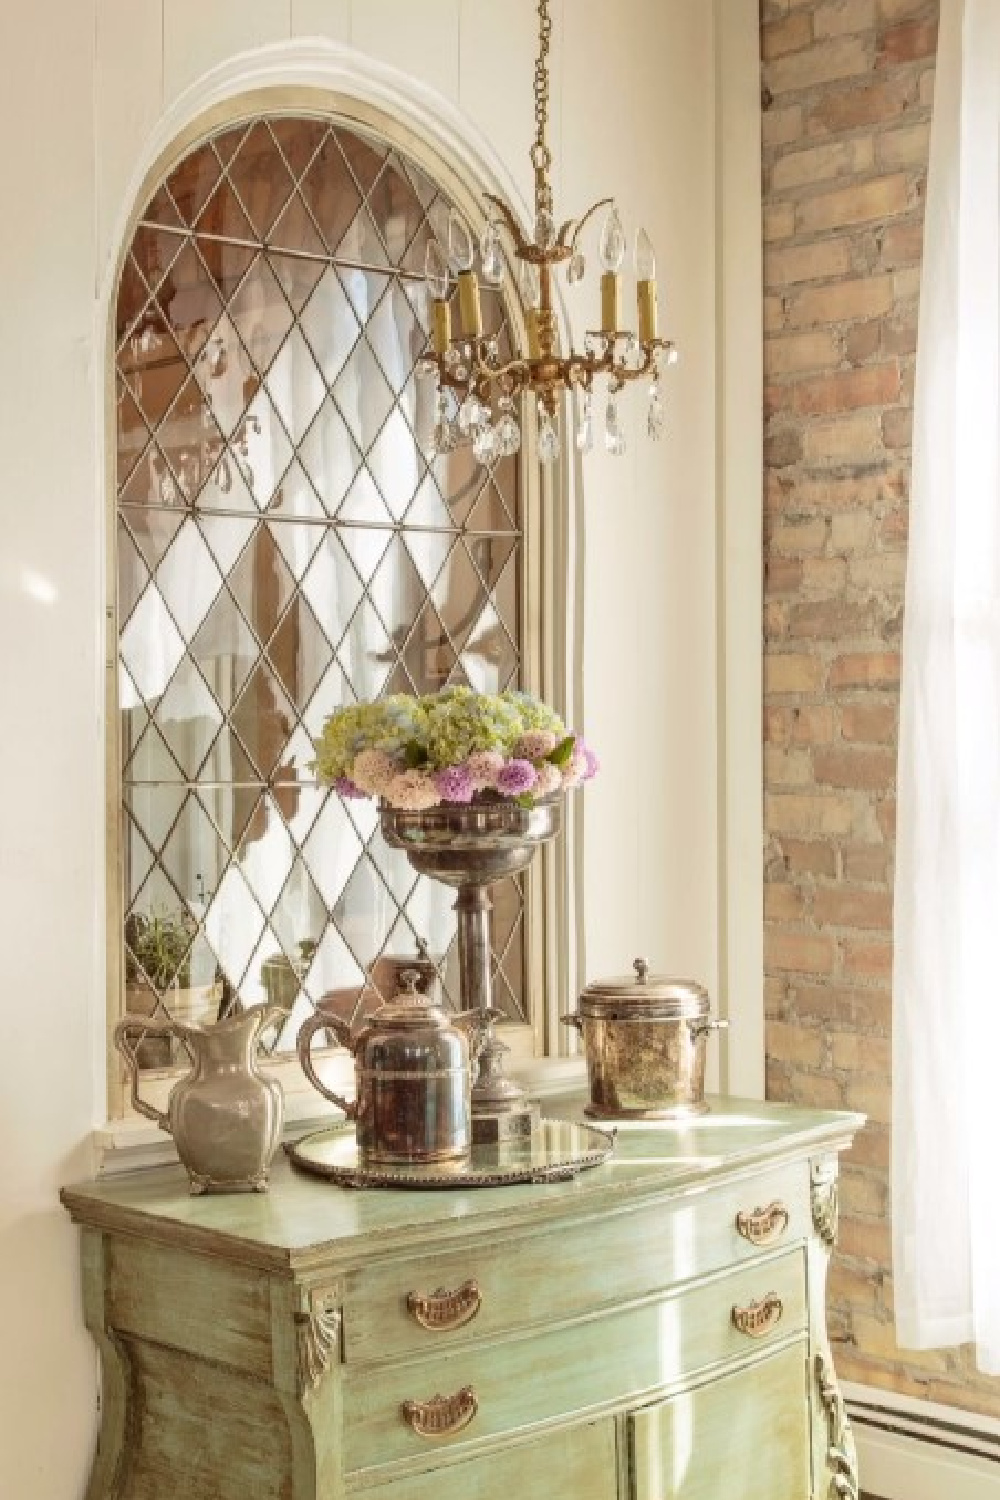 From Fifi O'Neill's THE ROMANTIC HOME with charming homes embodying cozy atmosphere, collections, and gentle color stories. #romanticinteriors #fifioneill #theromantichome